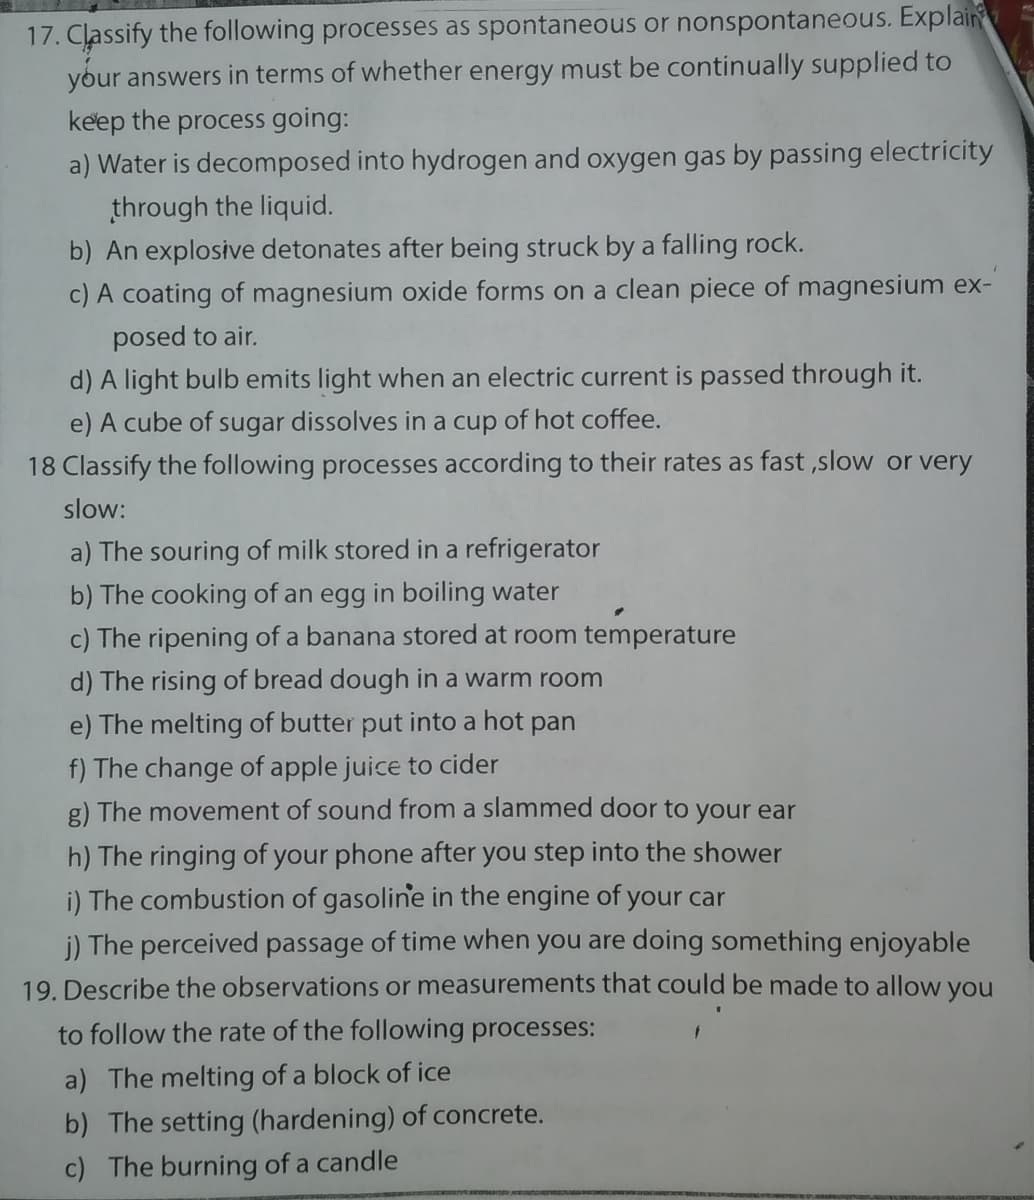 17. Classify the following processes as spontaneous or nonspontaneous. Explain
your answers in terms of whether energy must be continually supplied to
keep the process going:
a) Water is decomposed into hydrogen and oxygen gas by passing electricity
through the liquid.
b) An explosive detonates after being struck by a falling rock.
c) A coating of magnesium oxide forms on a clean piece of magnesium ex-
posed to air.
d) A light bulb emits light when an electric current is passed through it.
e) A cube of sugar dissolves in a cup of hot coffee.
18 Classify the following processes according to their rates as fast ,slow or very
slow:
a) The souring of milk stored in a refrigerator
b) The cooking of an egg in boiling water
c) The ripening of a banana stored at room temperature
d) The rising of bread dough in a warm room
e) The melting of butter put into a hot pan
f) The change of apple juice to cider
g) The movement of sound from a slammed door to your ear
h) The ringing of your phone after you step into the shower
i) The combustion of gasoline in the engine of your car
j) The perceived passage of time when you are doing something enjoyable
19. Describe the observations or measurements that could be made to allow you
to follow the rate of the following processes:
a) The melting of a block of ice
b) The setting (hardening) of concrete.
c) The burning of a candle
